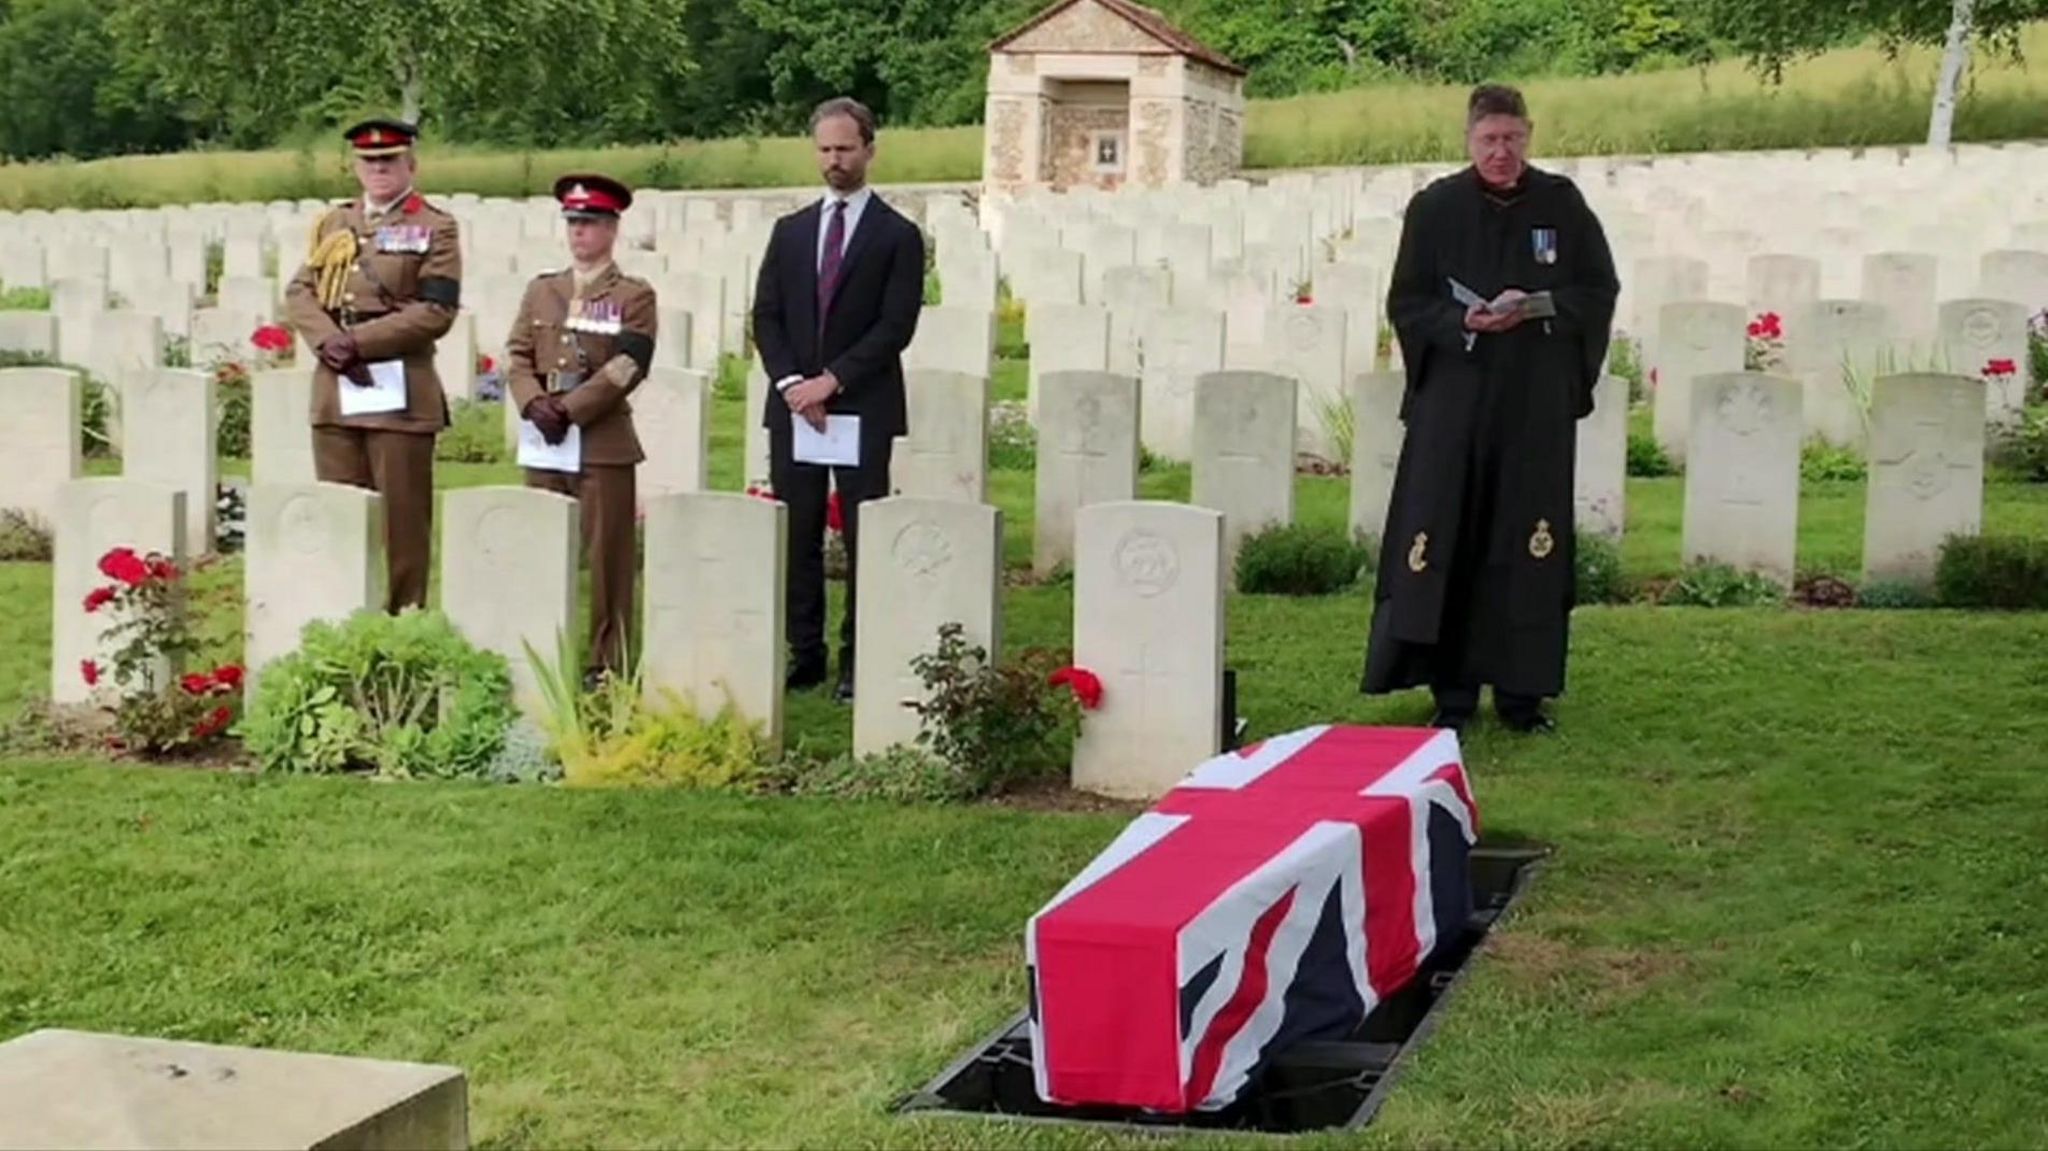 A funeral service at a British war cemetery in France, a coffin with a British flag draped across it is being lowered into the ground and a vicar is reading beside military personnel 